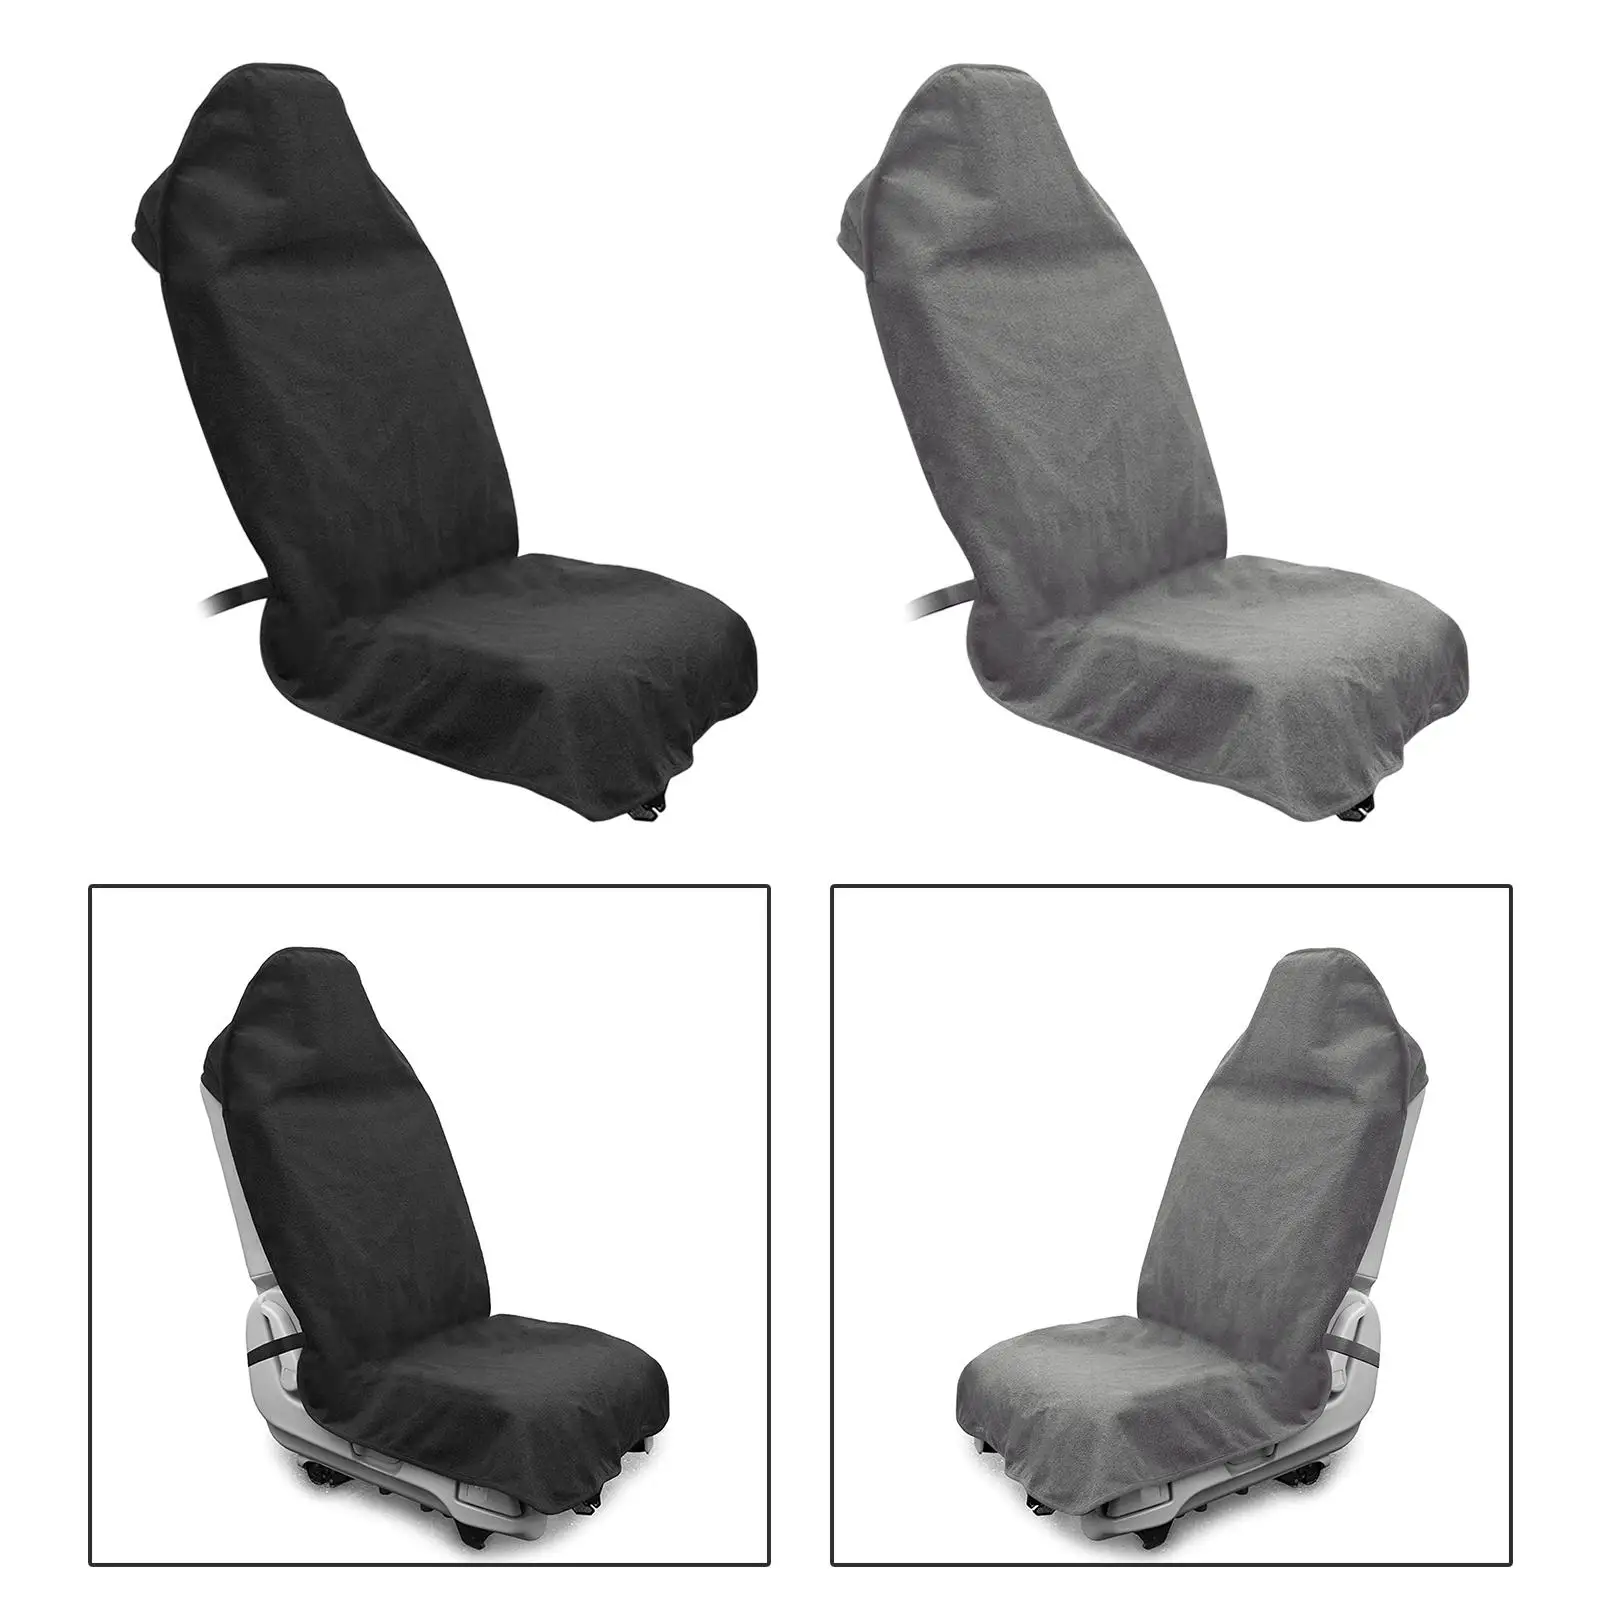 Universal Car Seat Cover SweatWaterfor Running Hiking Suvs